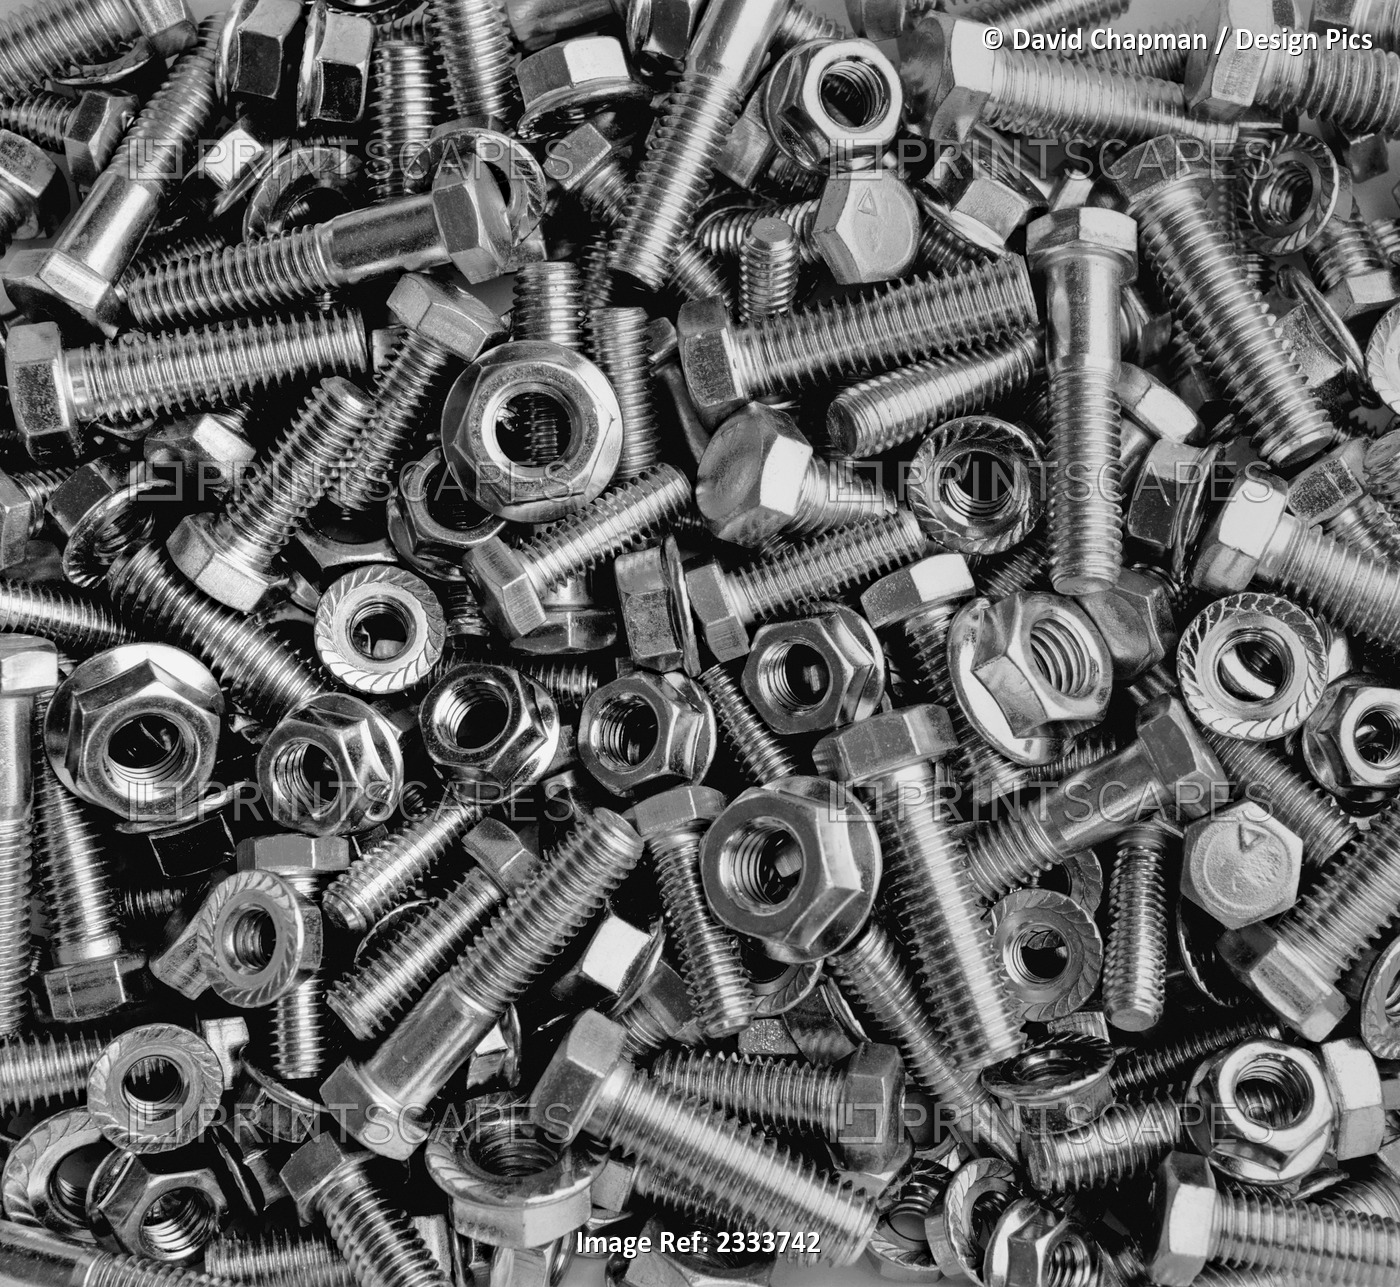 Nuts and bolts; Waterloo, Quebec, Canada